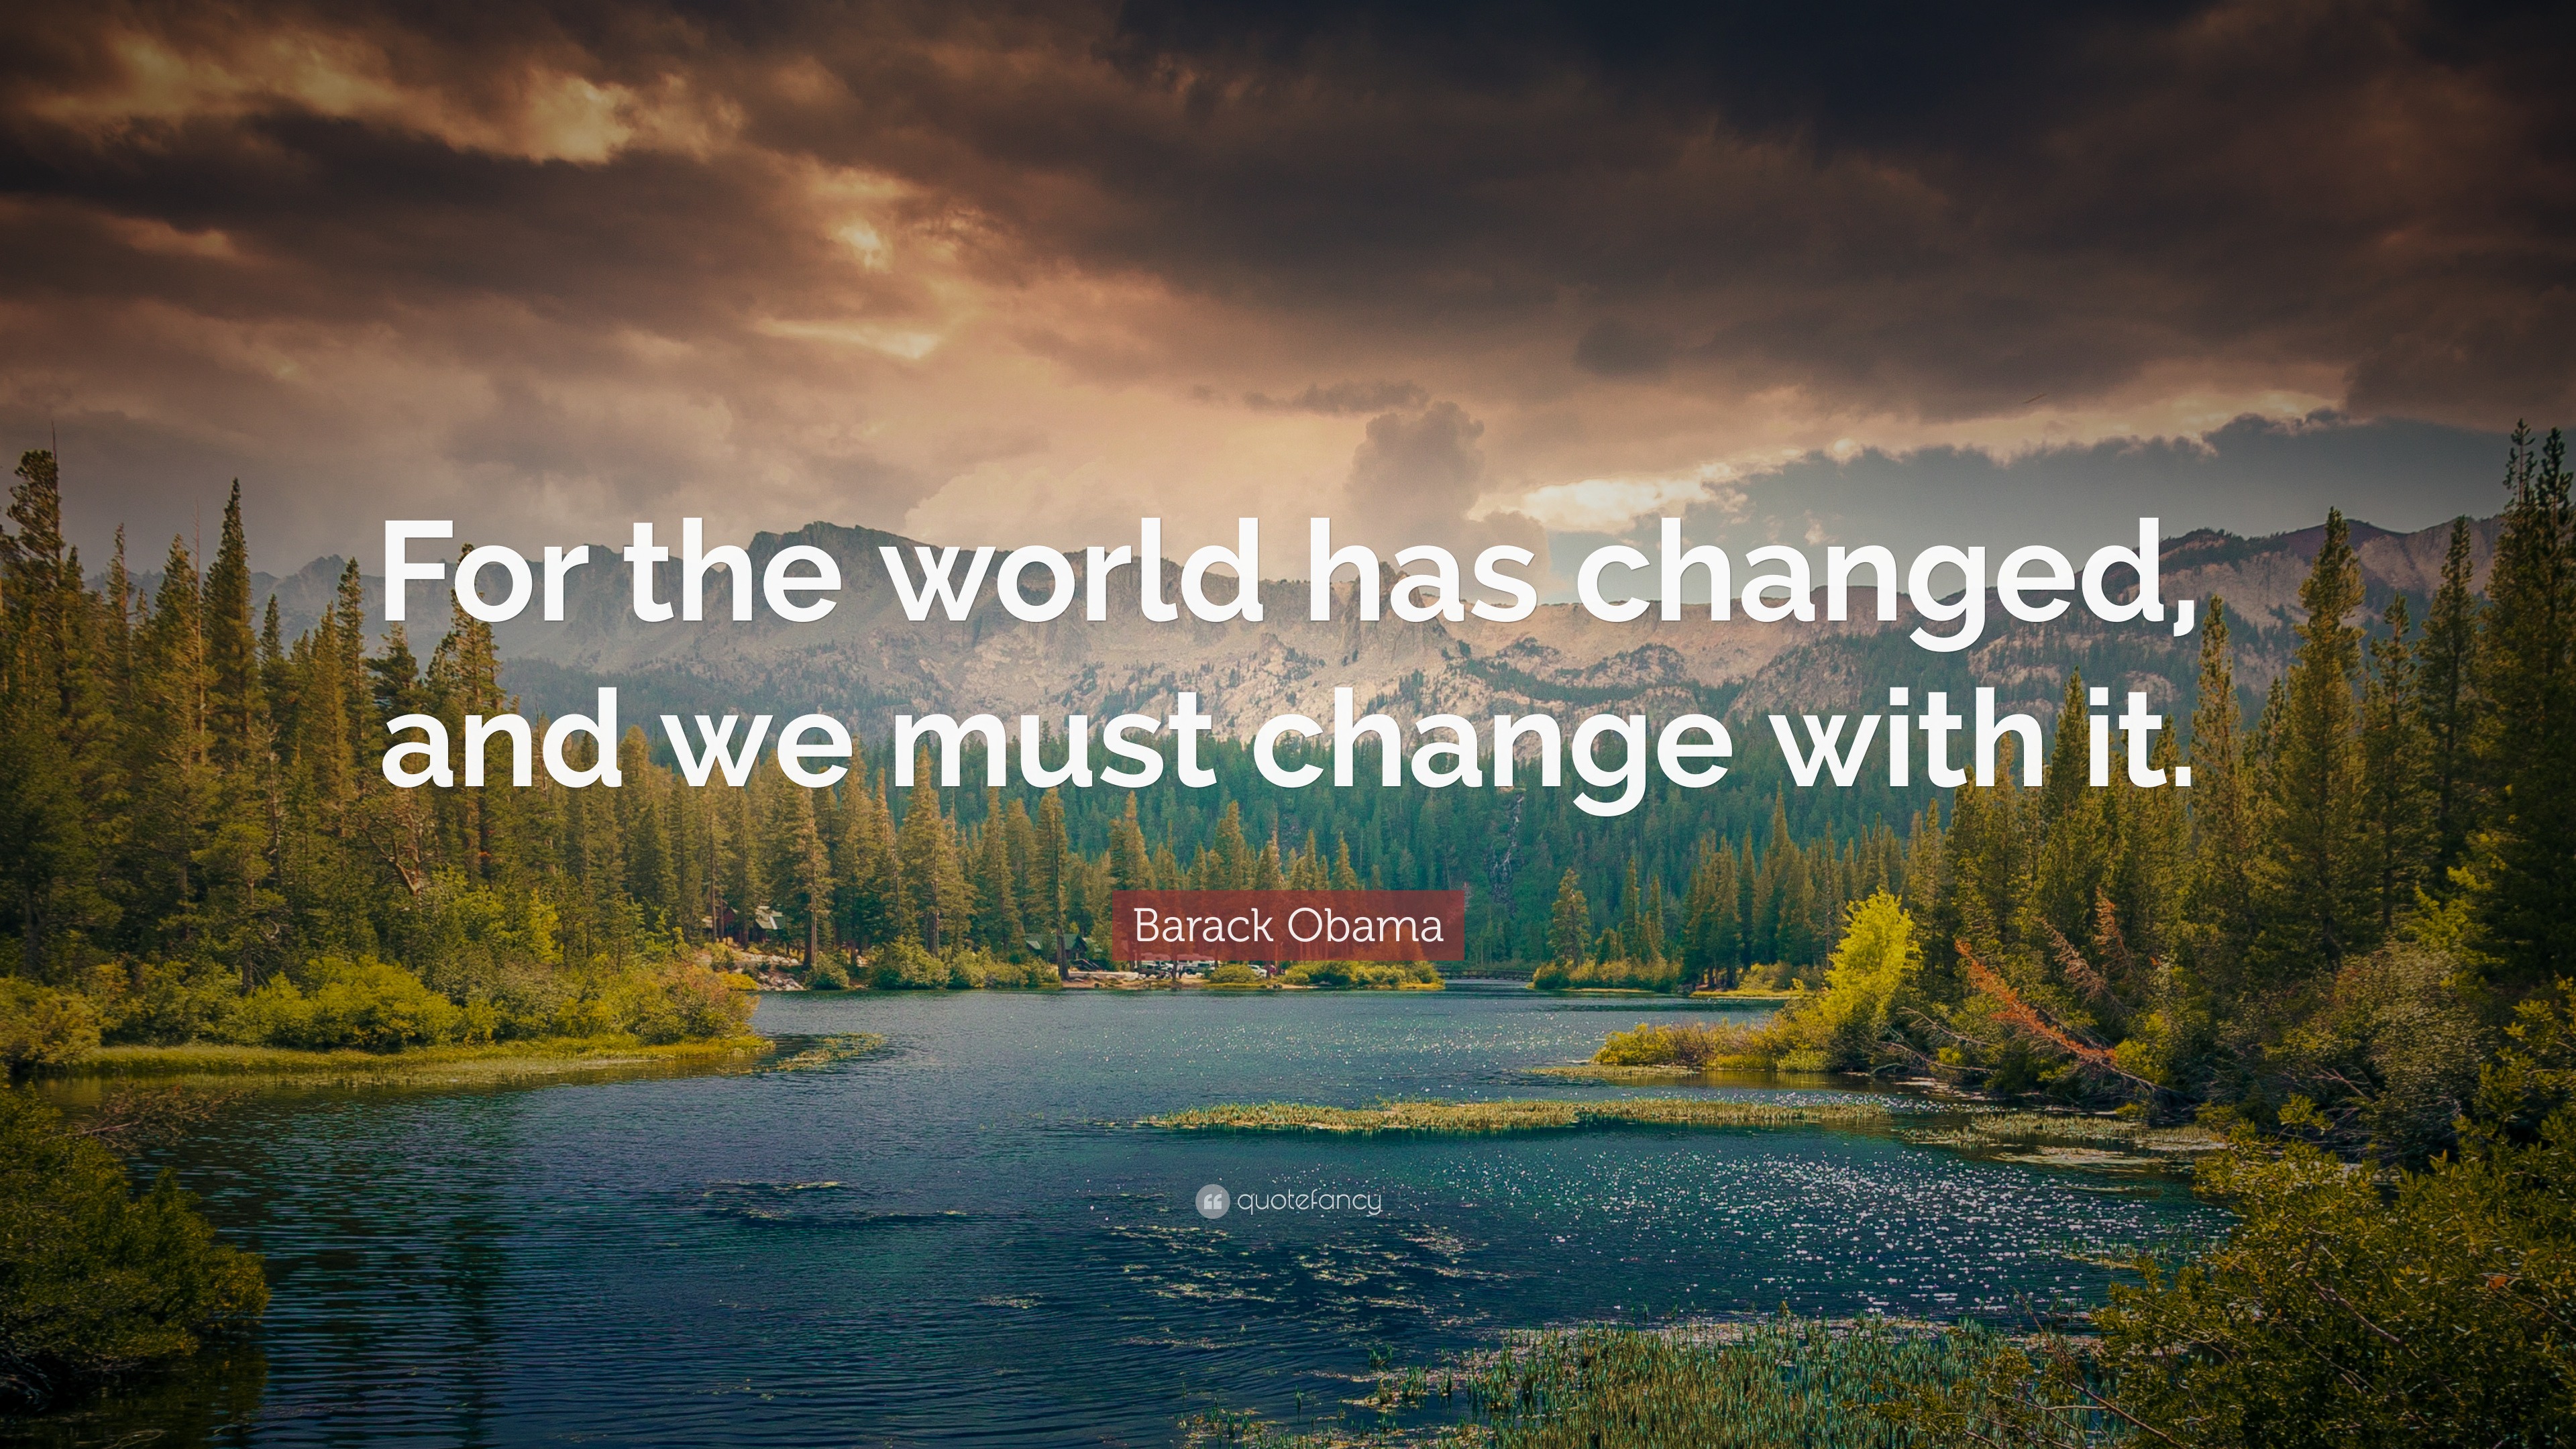 Barack Obama Quote: “For the world has changed, and we must change with ...